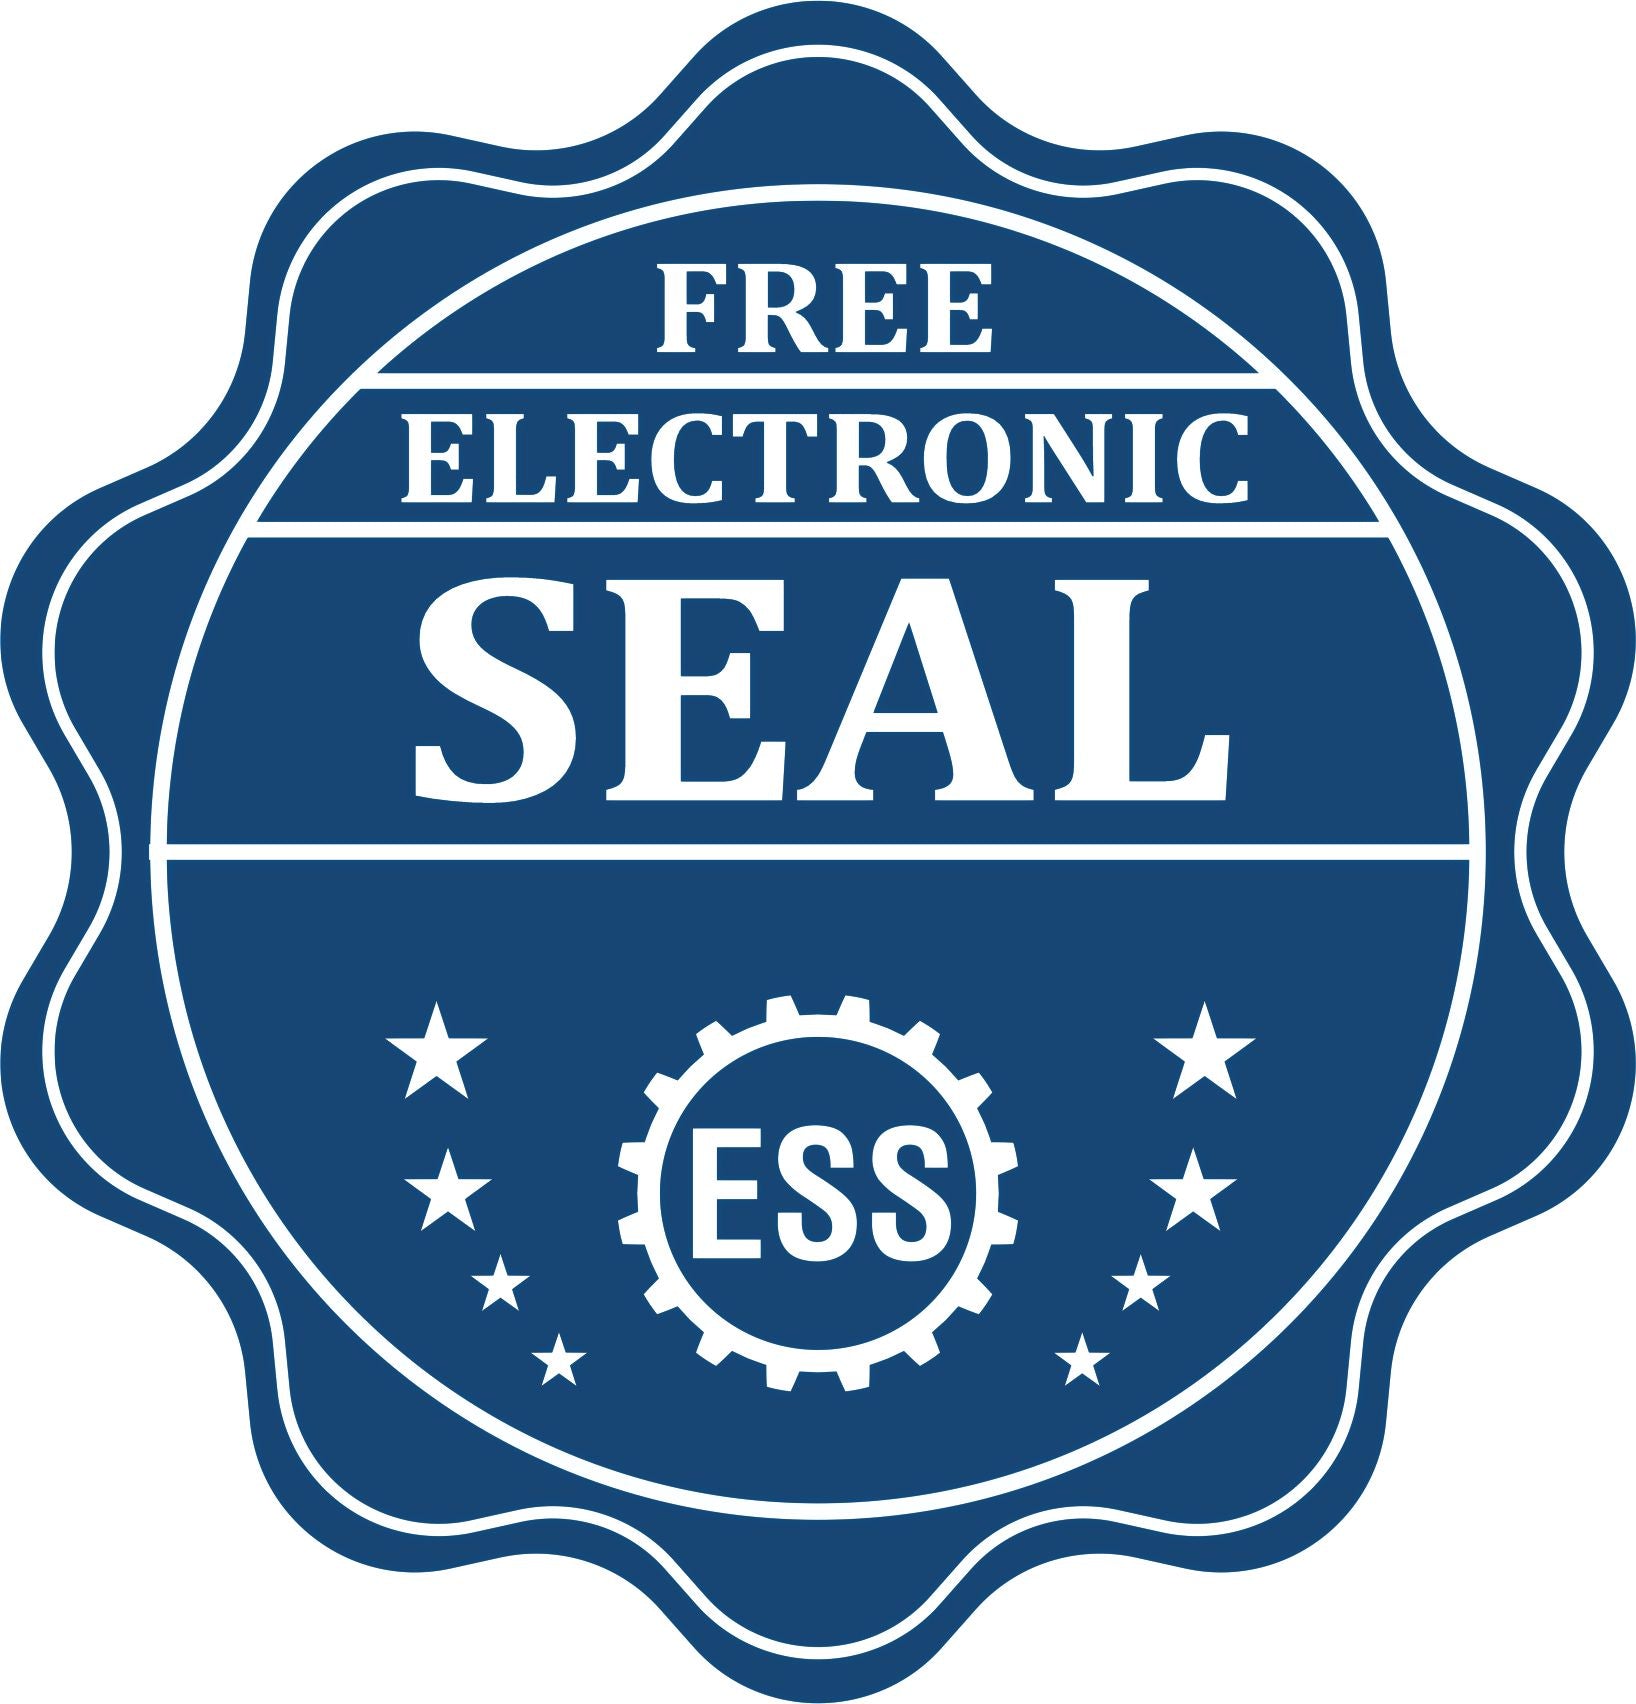 A badge showing a free electronic seal for the Premium MaxLight Pre-Inked Idaho Engineering Stamp with stars and the ESS gear on the emblem.